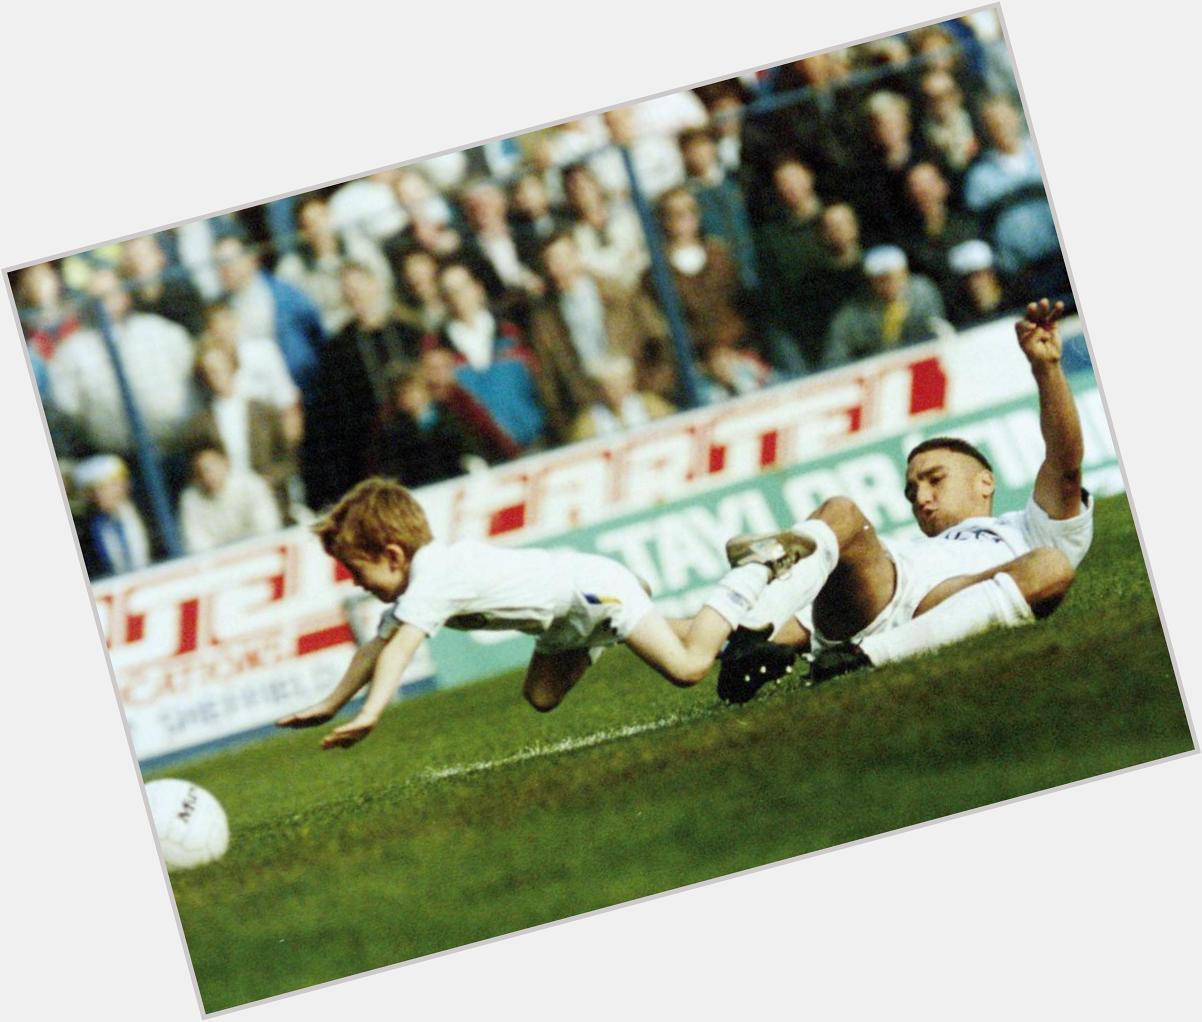 Happy 50th birthday to Vinnie Jones, a man never scared to put in a heavy challenge, irrespective of size. 